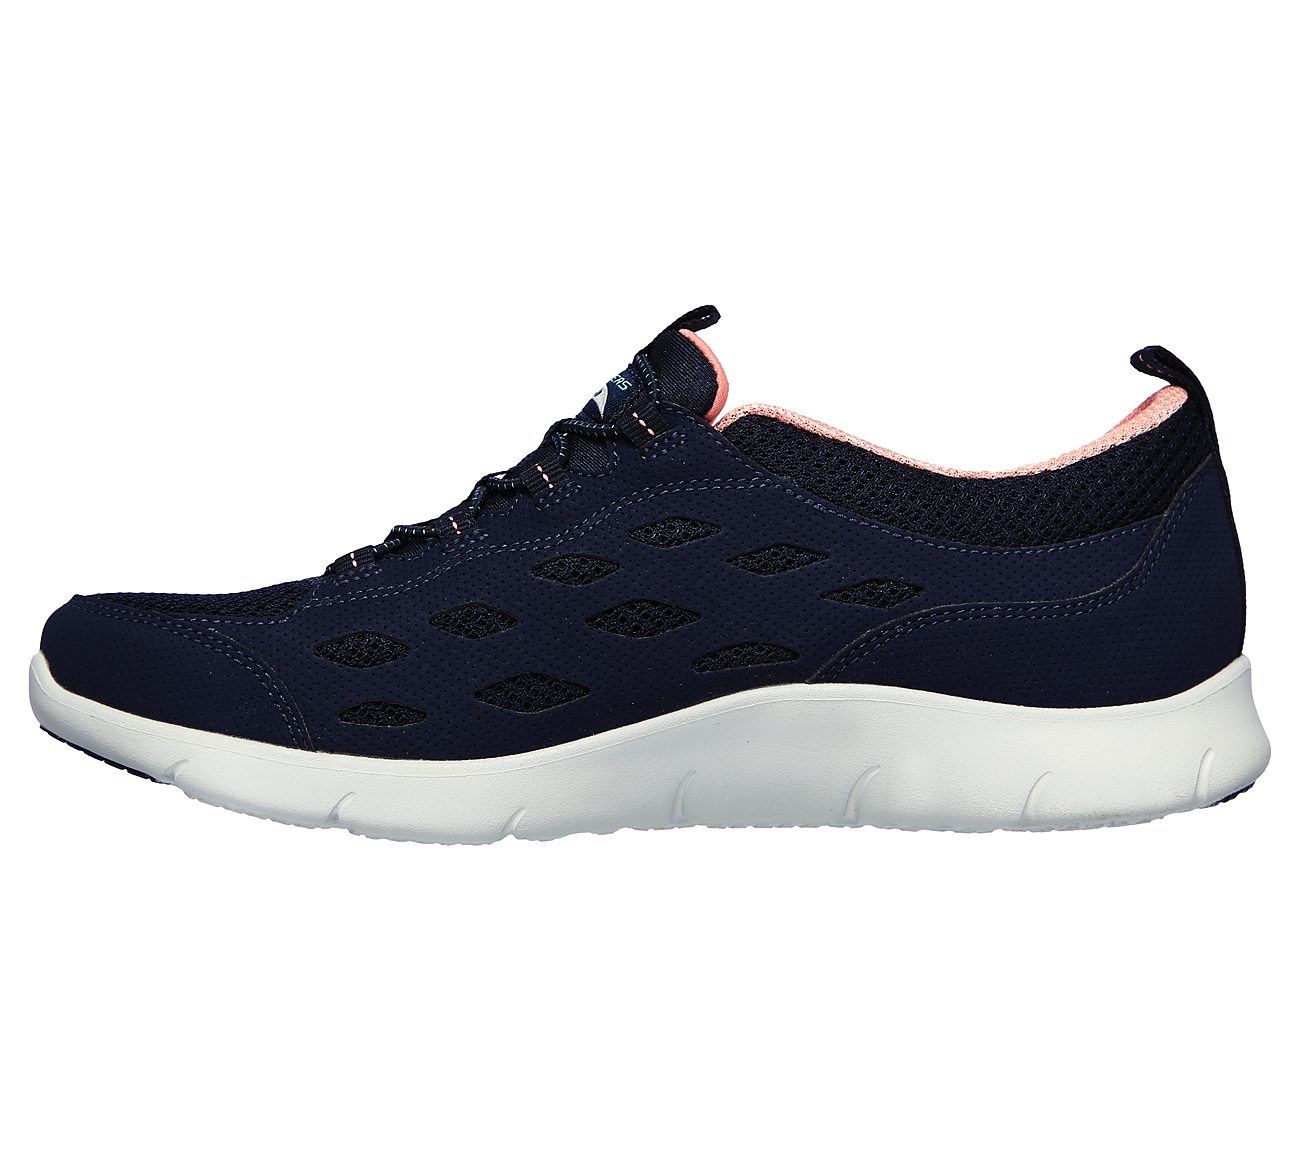 ARCH FIT REFINE, NAVY/CORAL Footwear Left View